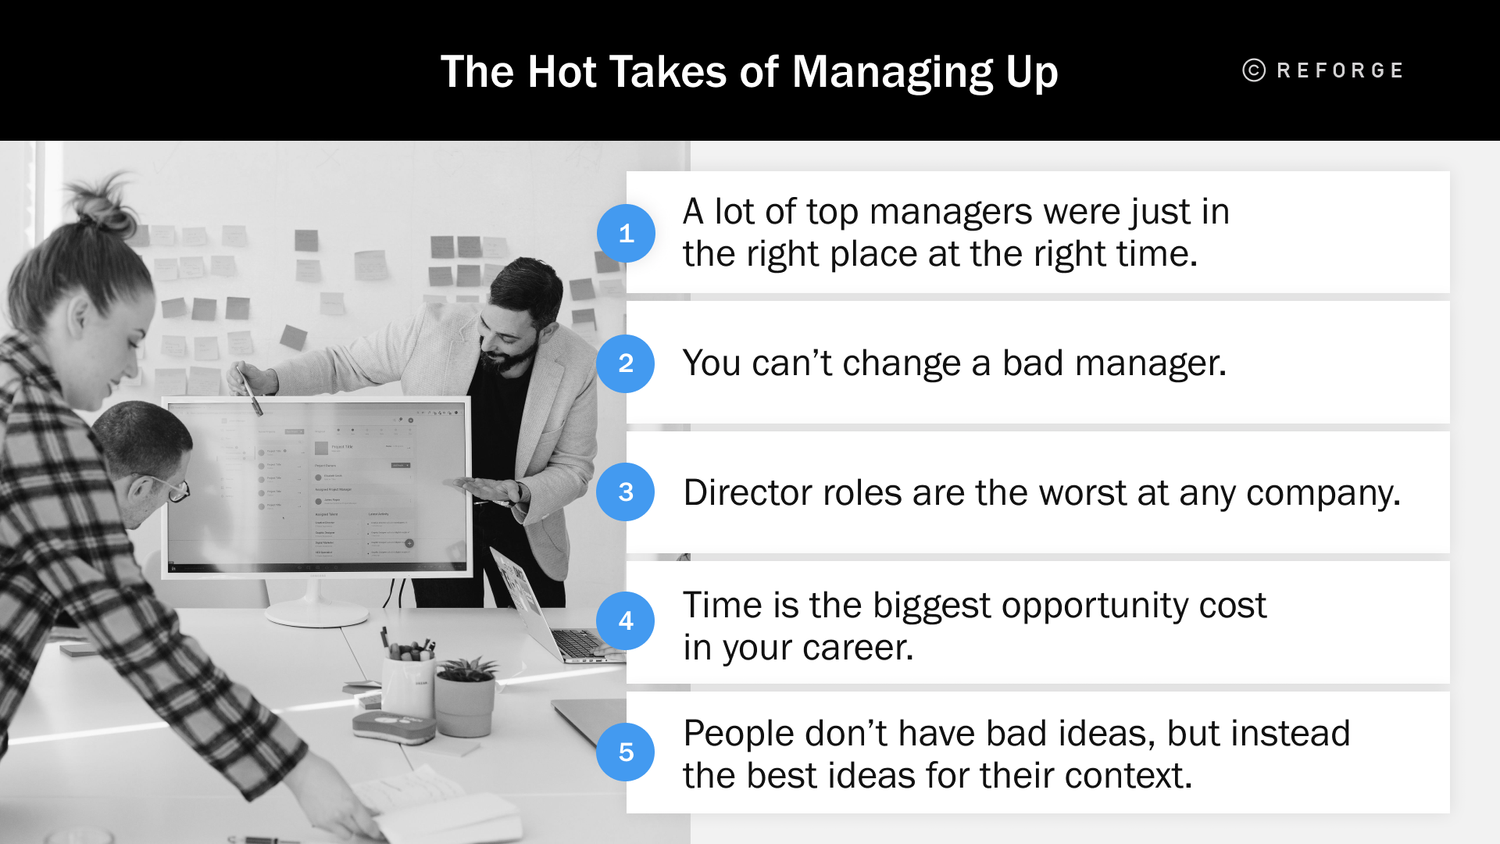 5 Managing Up Hot Takes From Top Tech Leaders